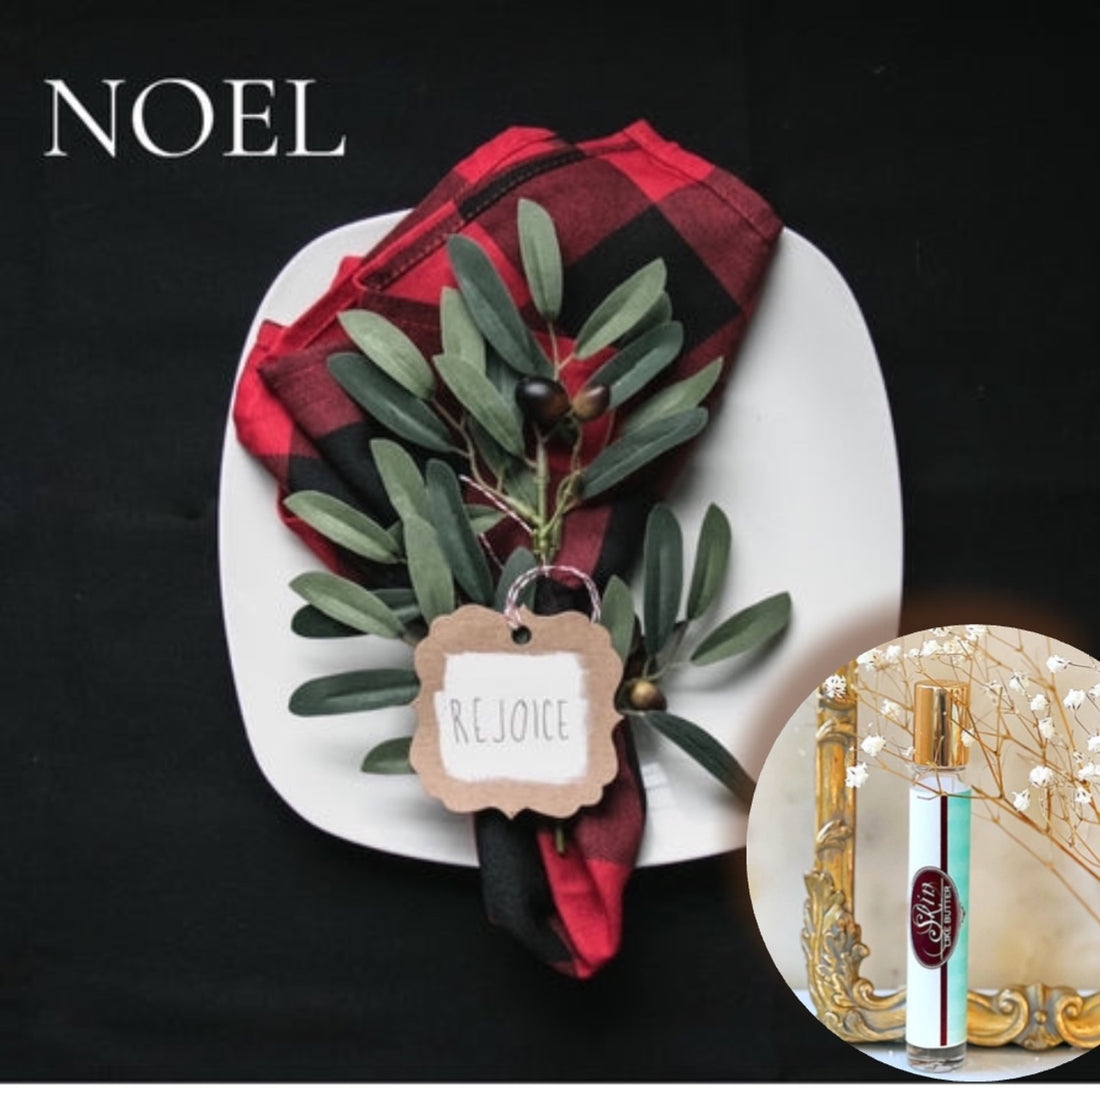 NOEL Skin Like Butter Roll on Perfume Sale! ~ Buy 1 get 1 50% off-use coupon code 2PLEASE